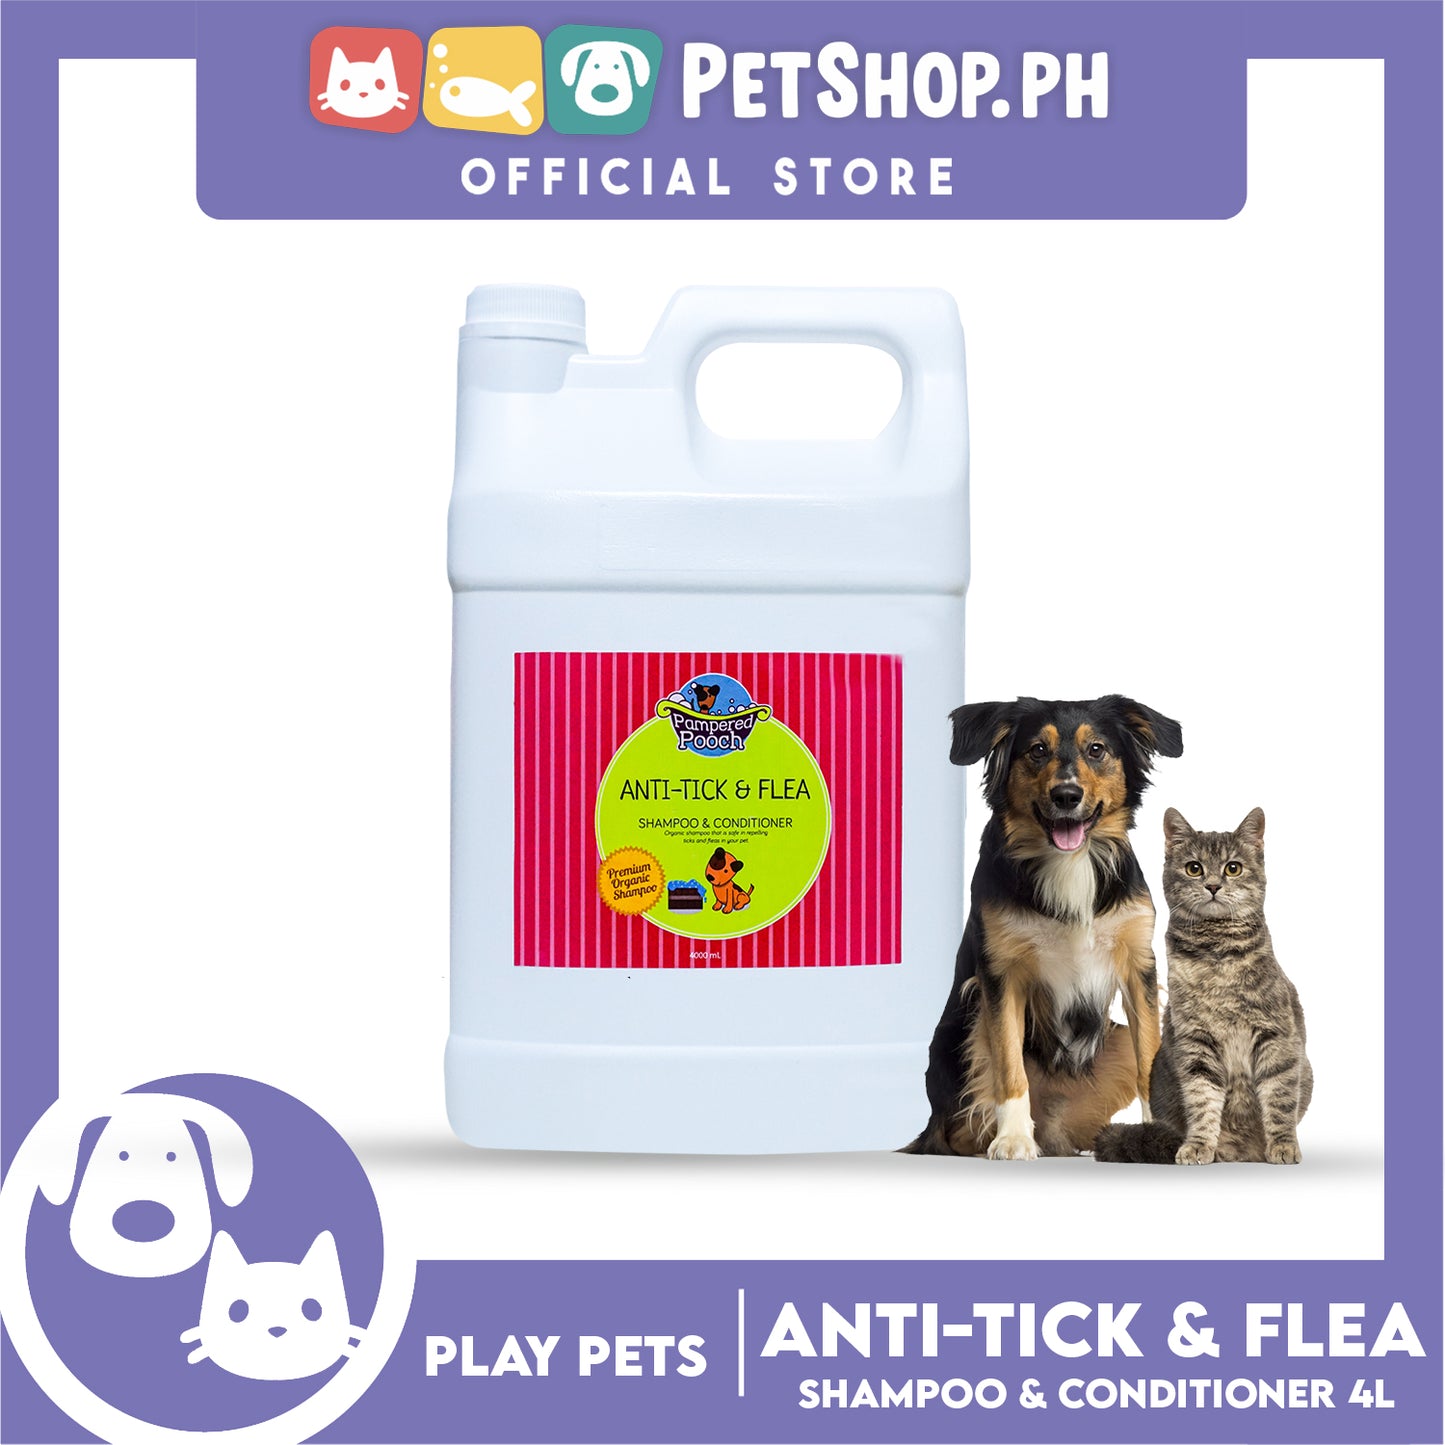 Play Pets Pampered Pooch Anti-Tick And Flea Shampoo And Conditioner 4000ml Premium Organic, Safe Repelling Ticks And Fleas In Your Pets